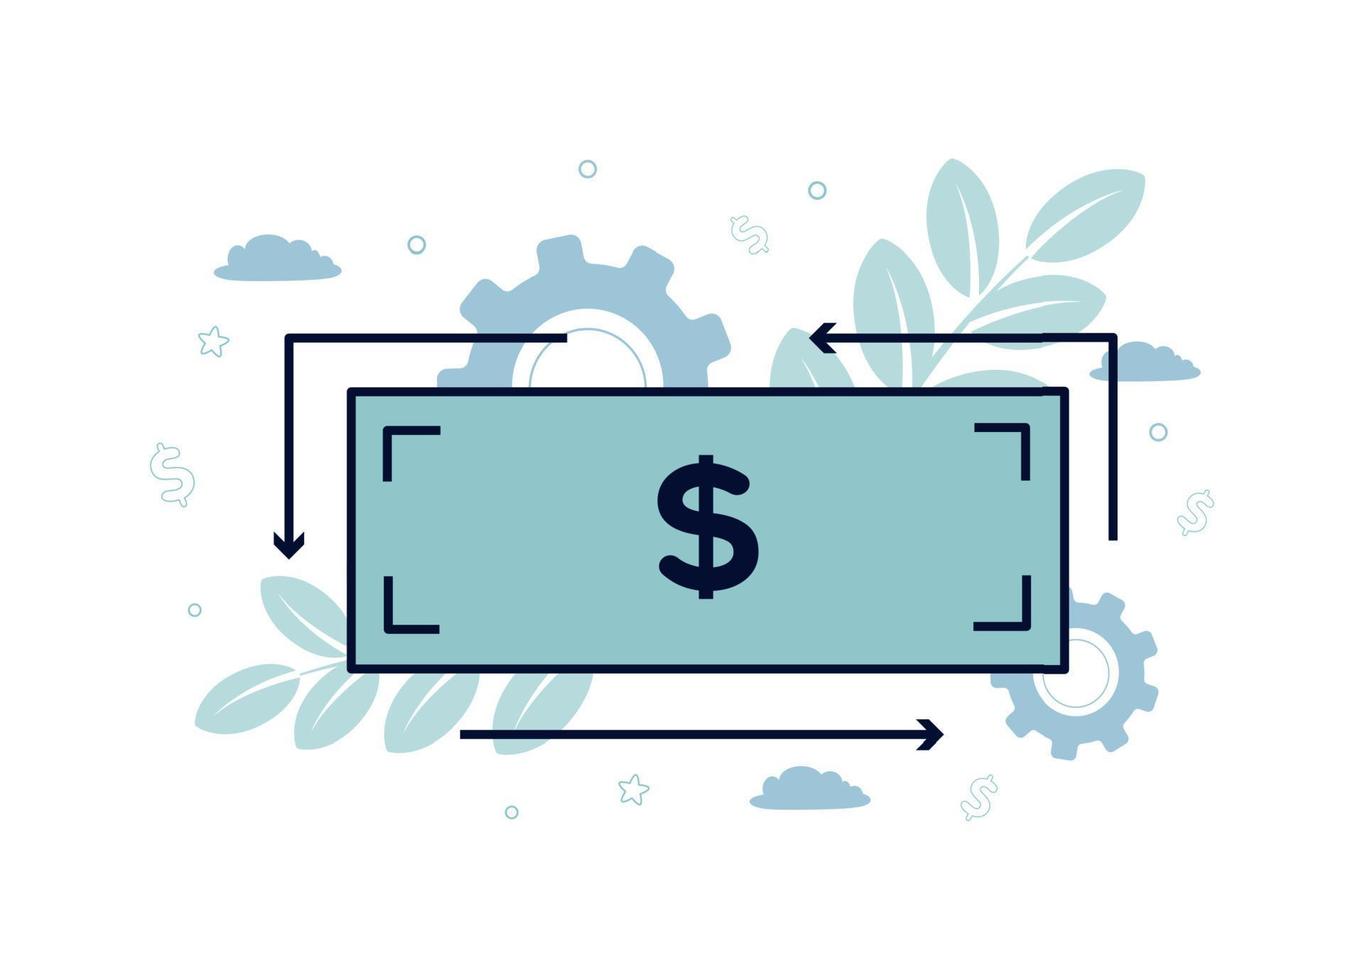 Finance illustration. International Currency Exchange. Dollar bill, around arrows, on a background of branches with leaves, clouds, dollar sign, stars vector